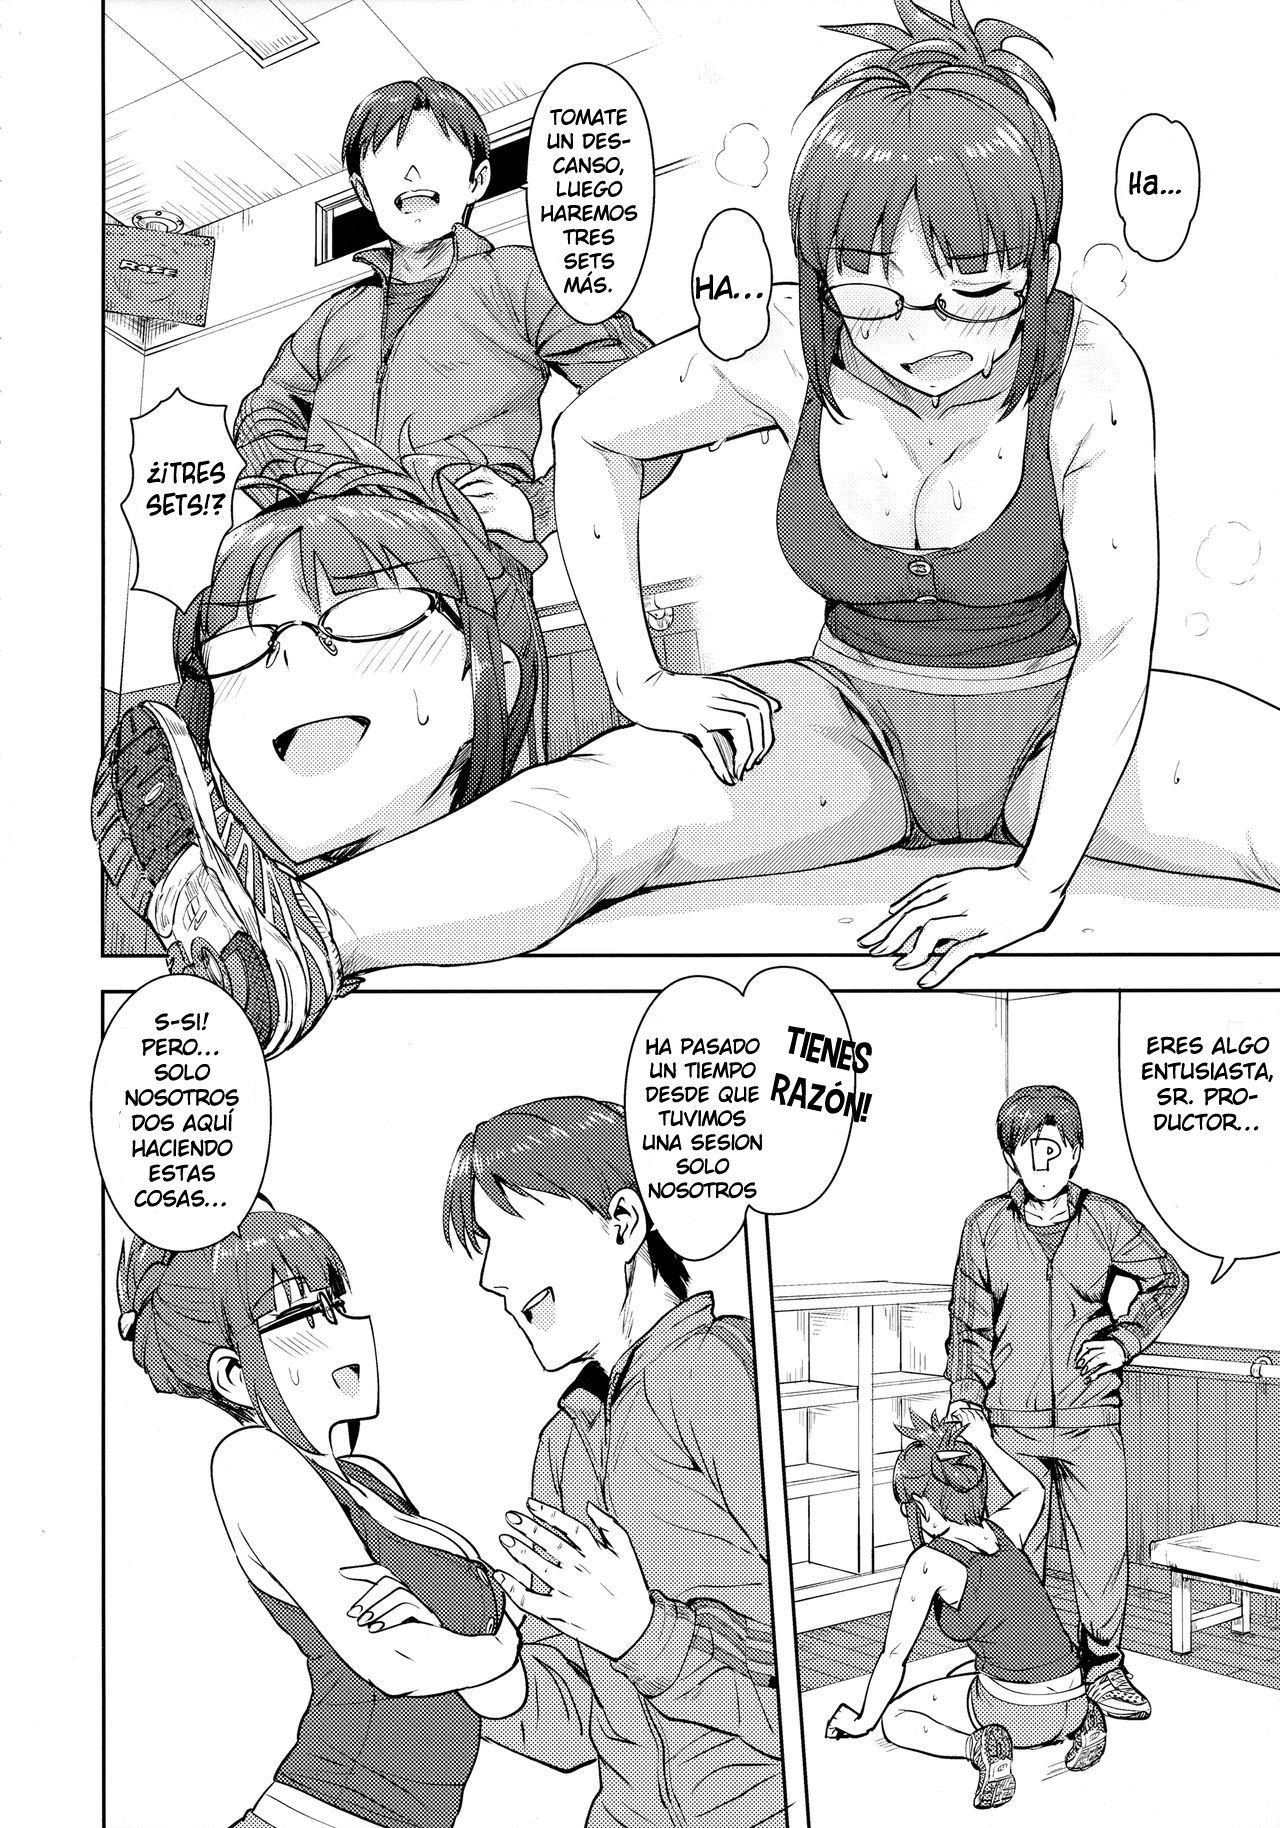 Stretching with Ritsuko - 2